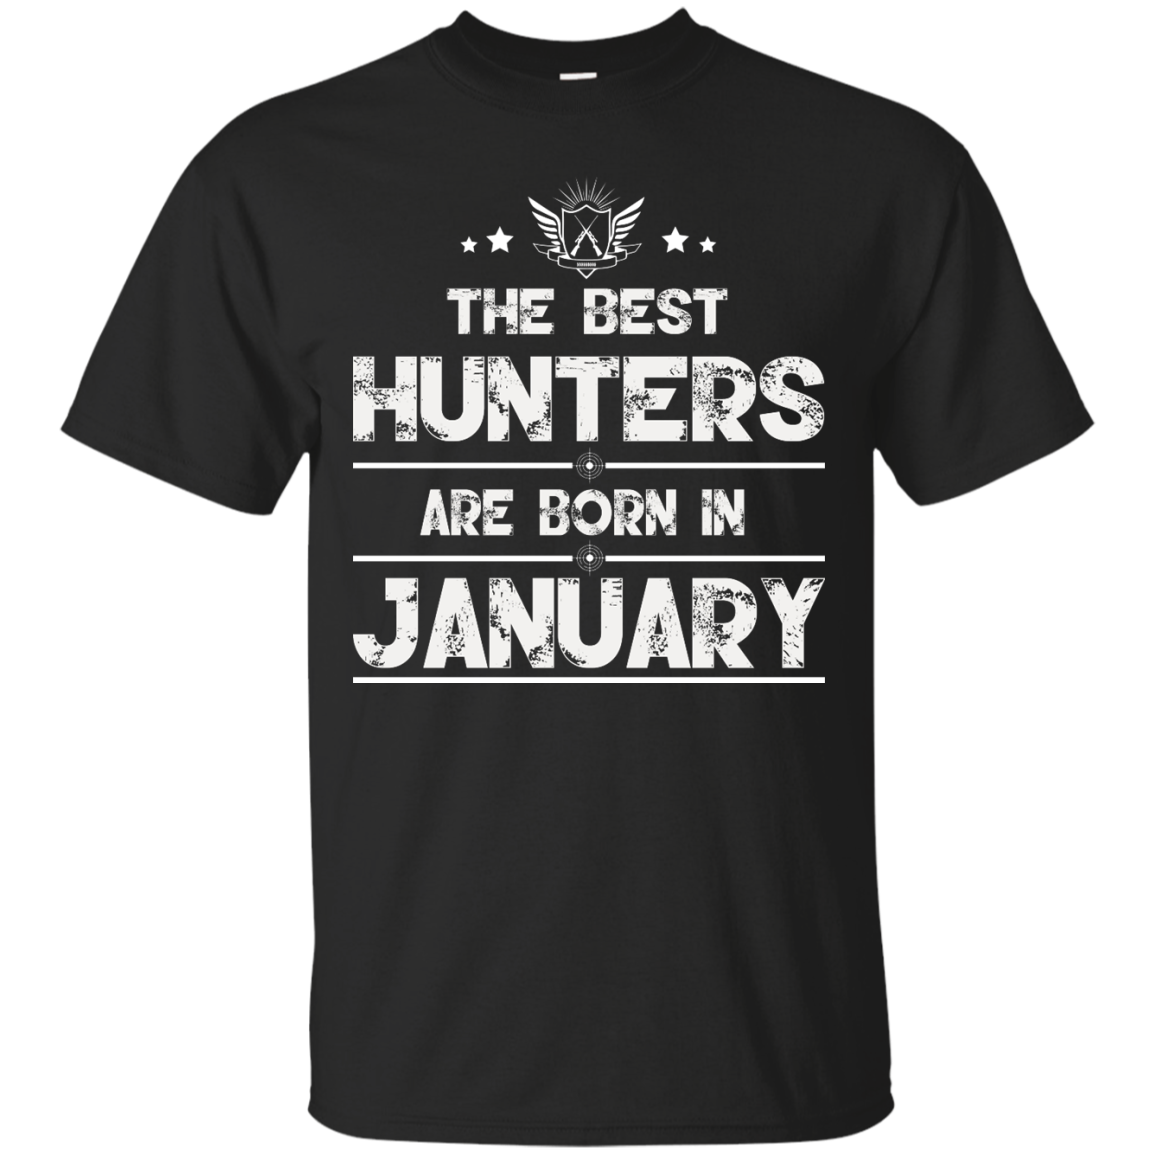 The Best Hunters Are Born in January Shirt, Hoodie, Tank